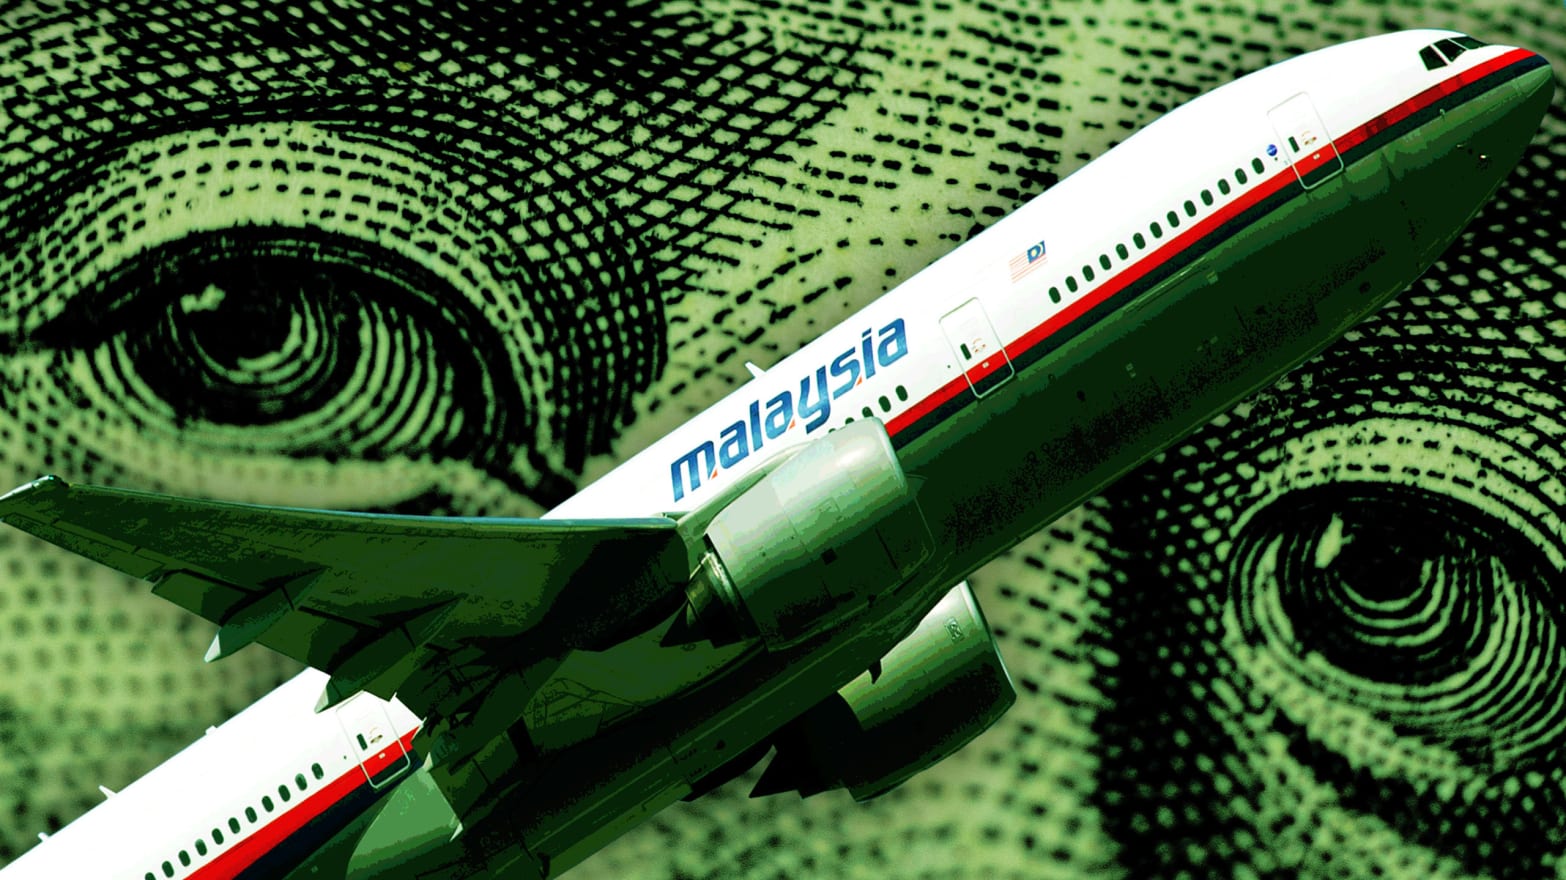 Scientists Say They Know Where MH370 Is—Just as Money Runs Out to Find It